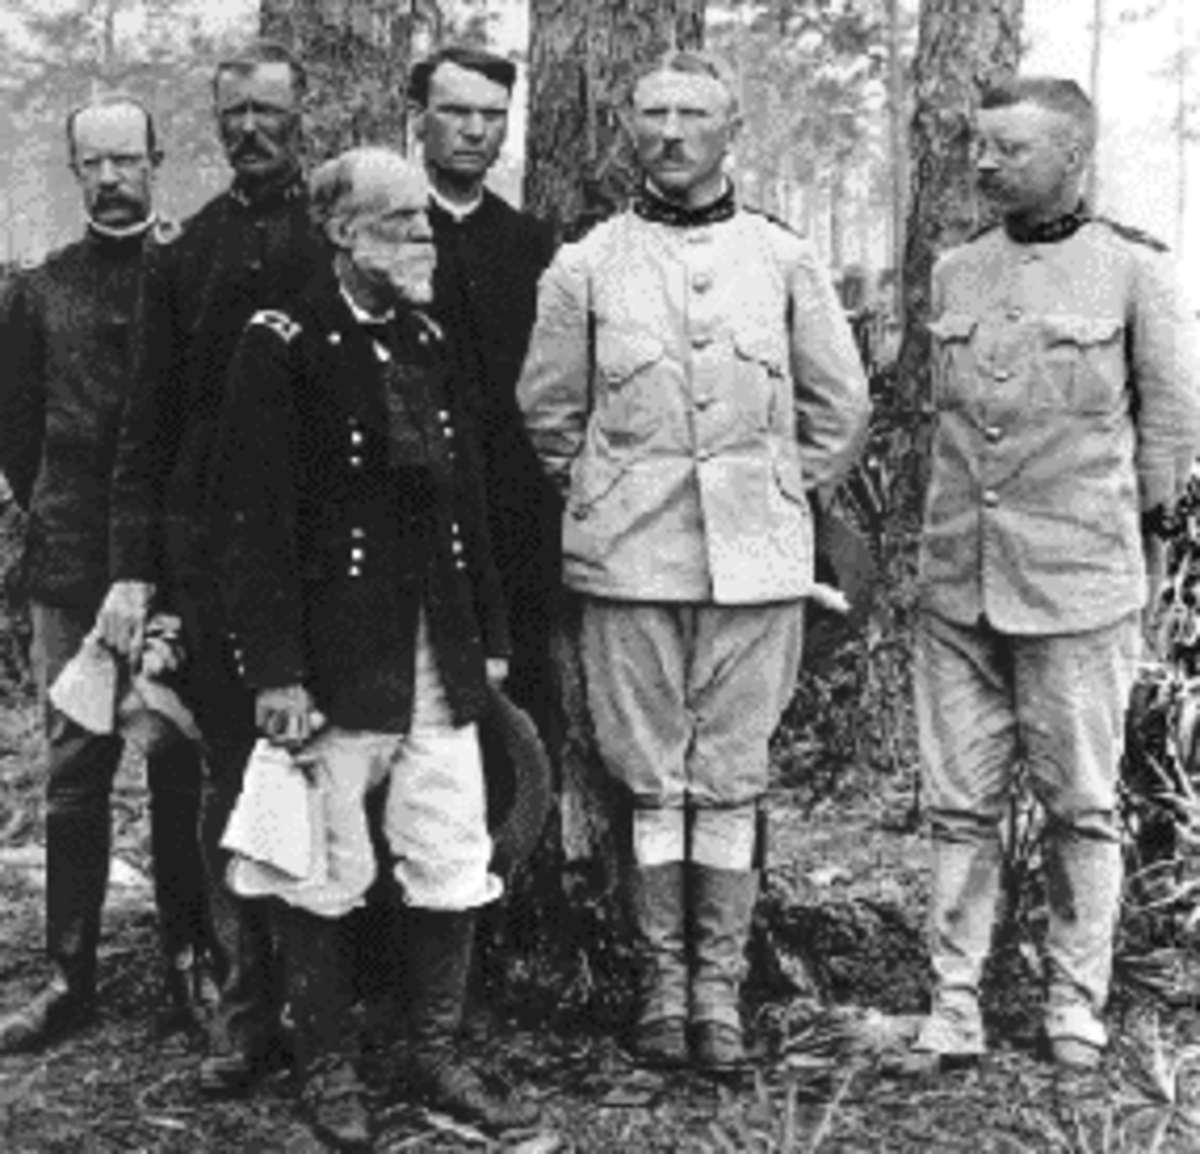 Theodore Roosevelt and the other officers of 1st Volunteer Cavalry Regiment